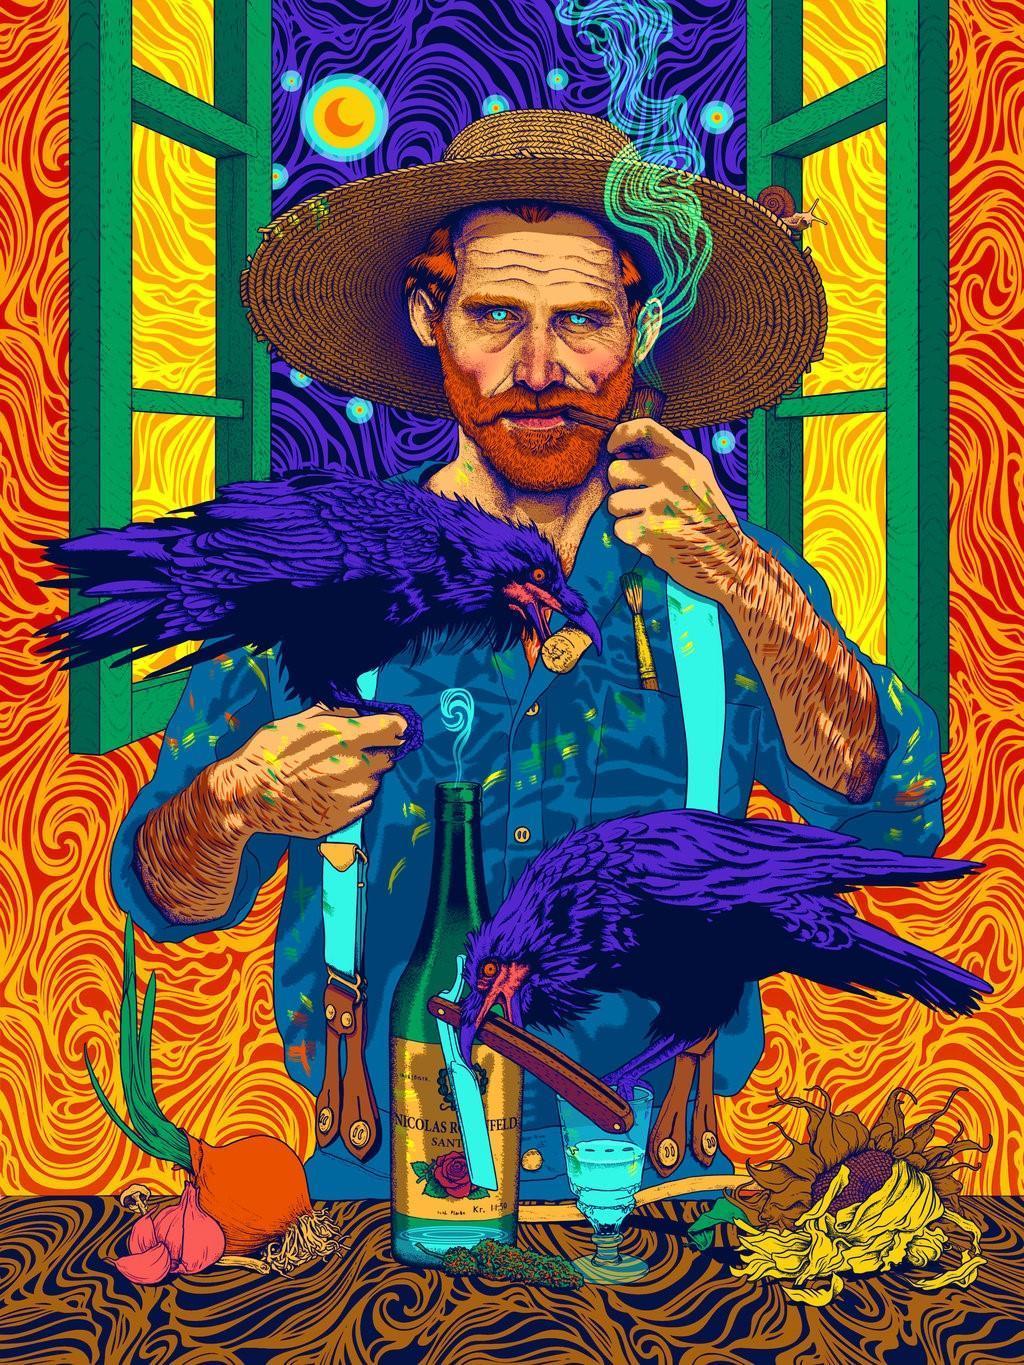 HD wallpaper, Smoking, Paint Brushes, Abstract, Psychedelic, Colorful, Sunflowers, Crow, Vincent Van Gogh